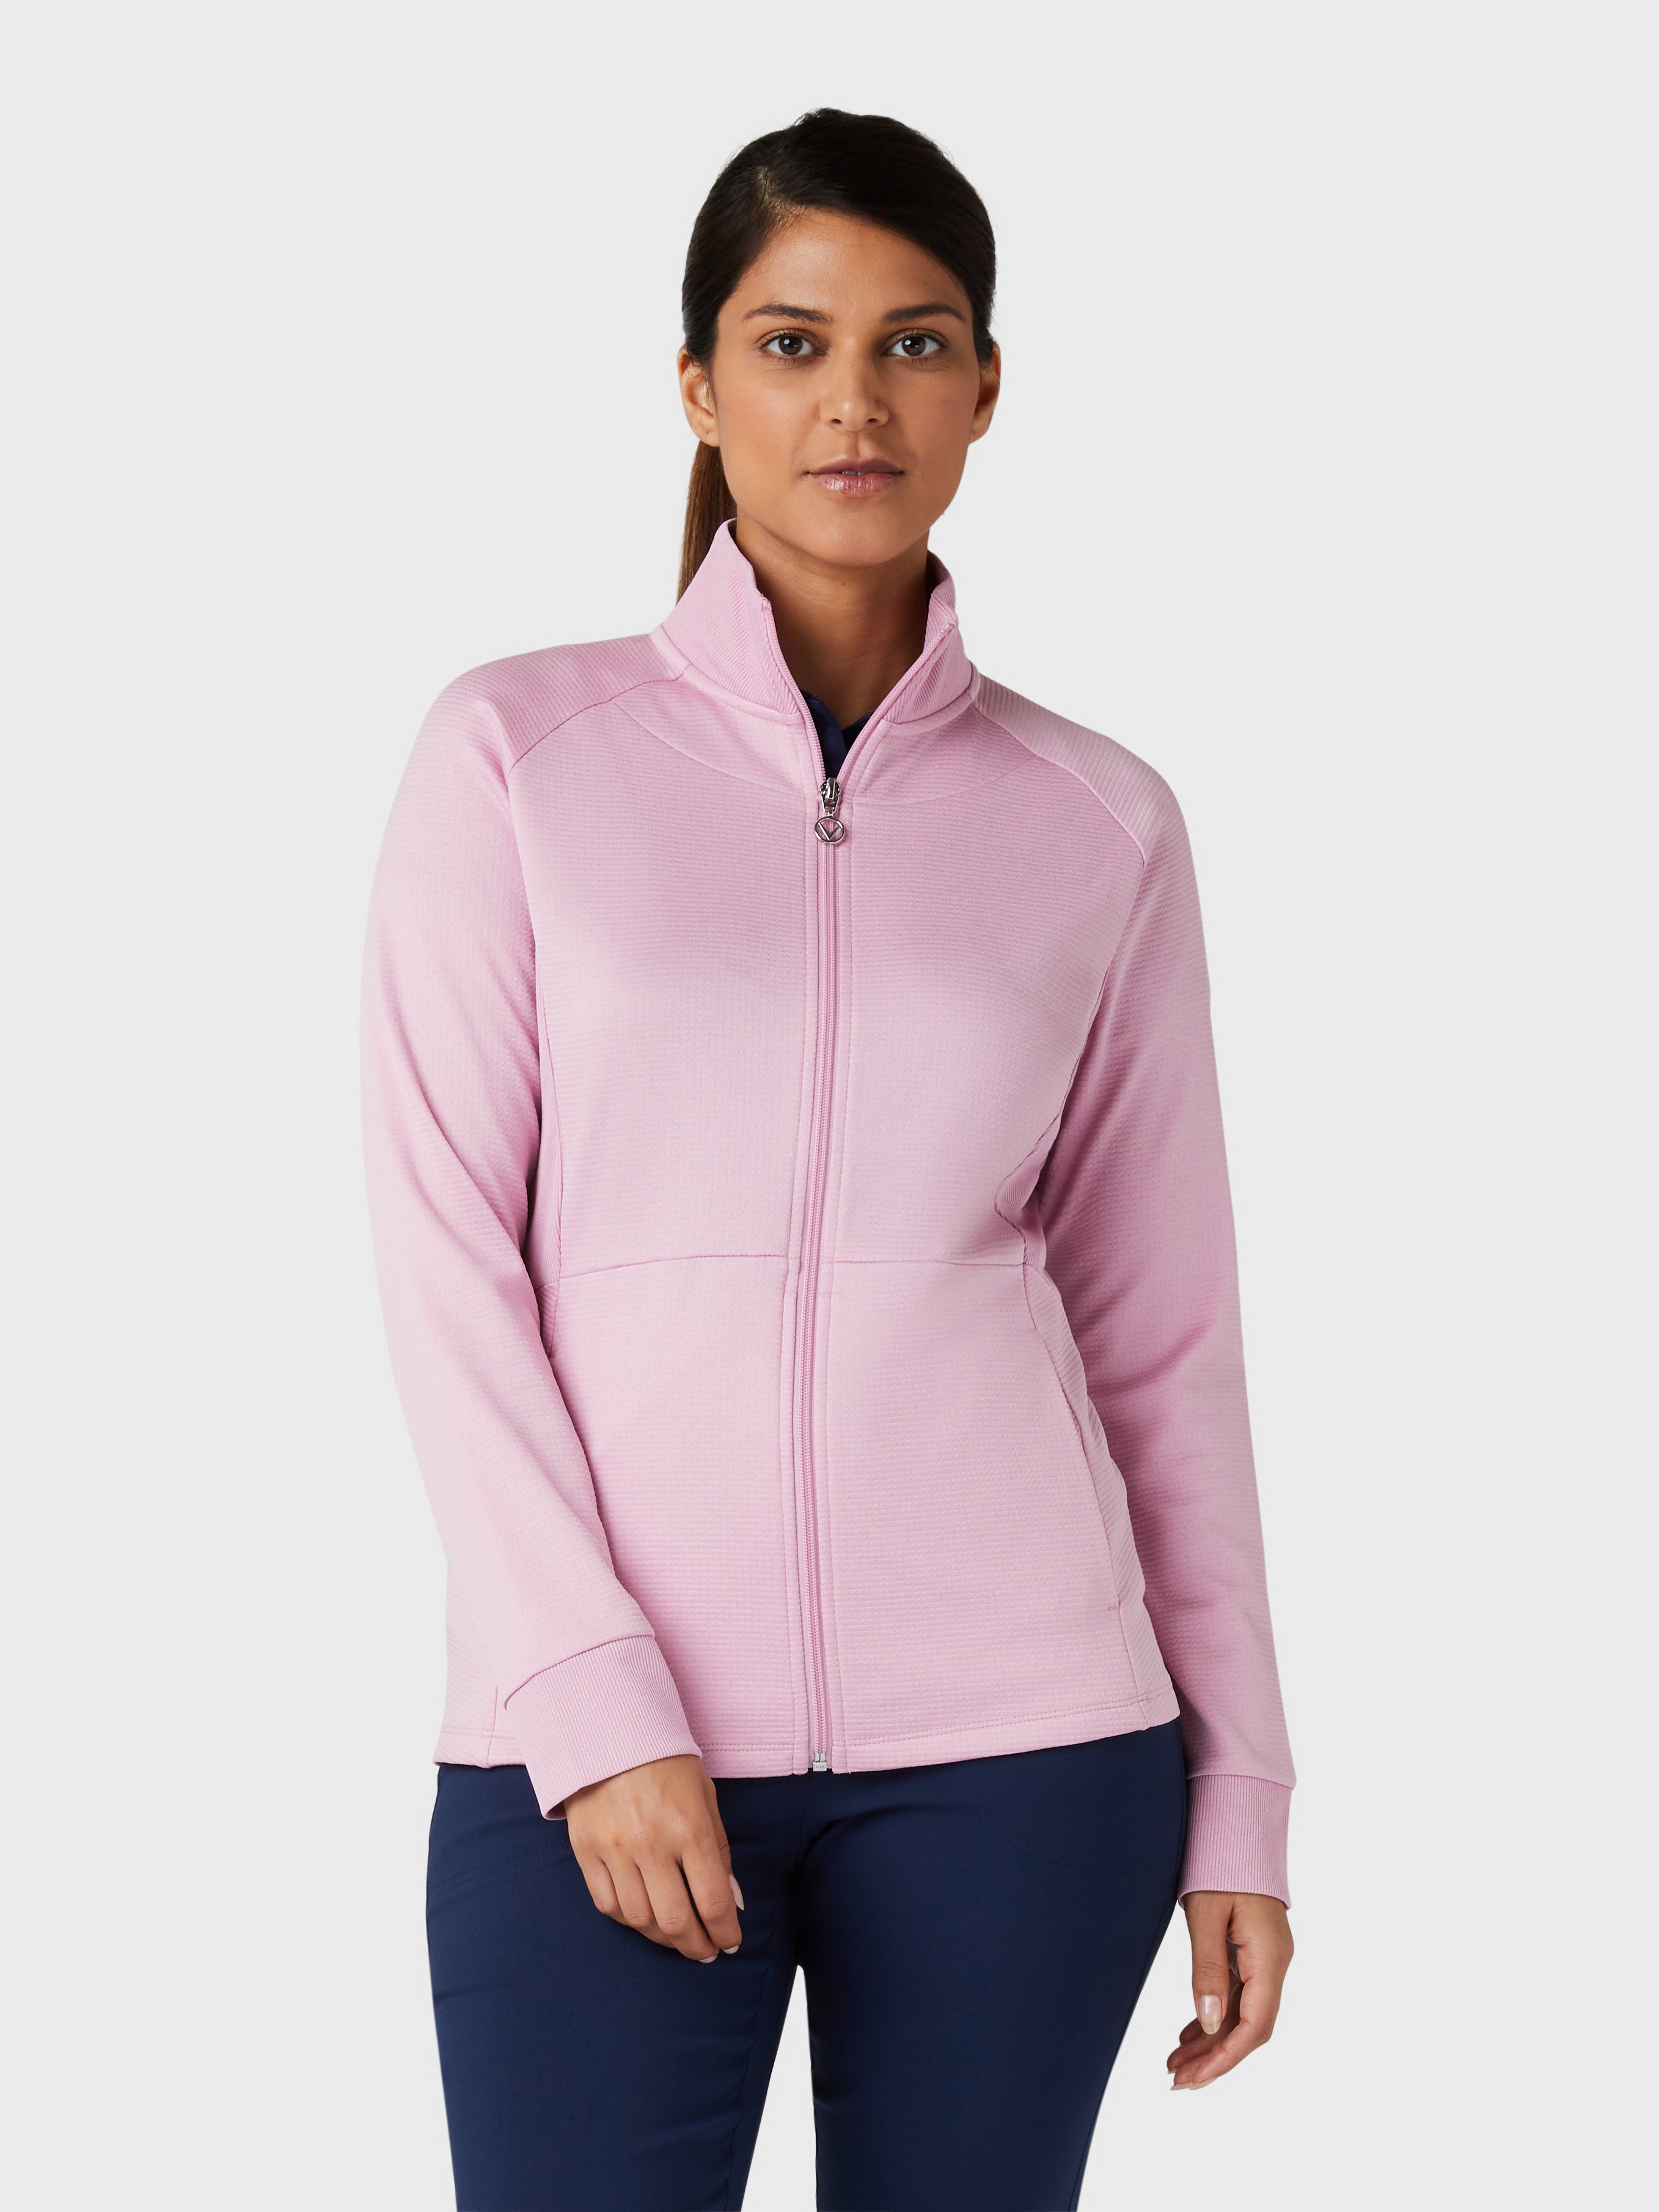 View Midweight Waffle Fleece Womens Jacket In Pink Nectar Heather Pink Nectar Htr XL information